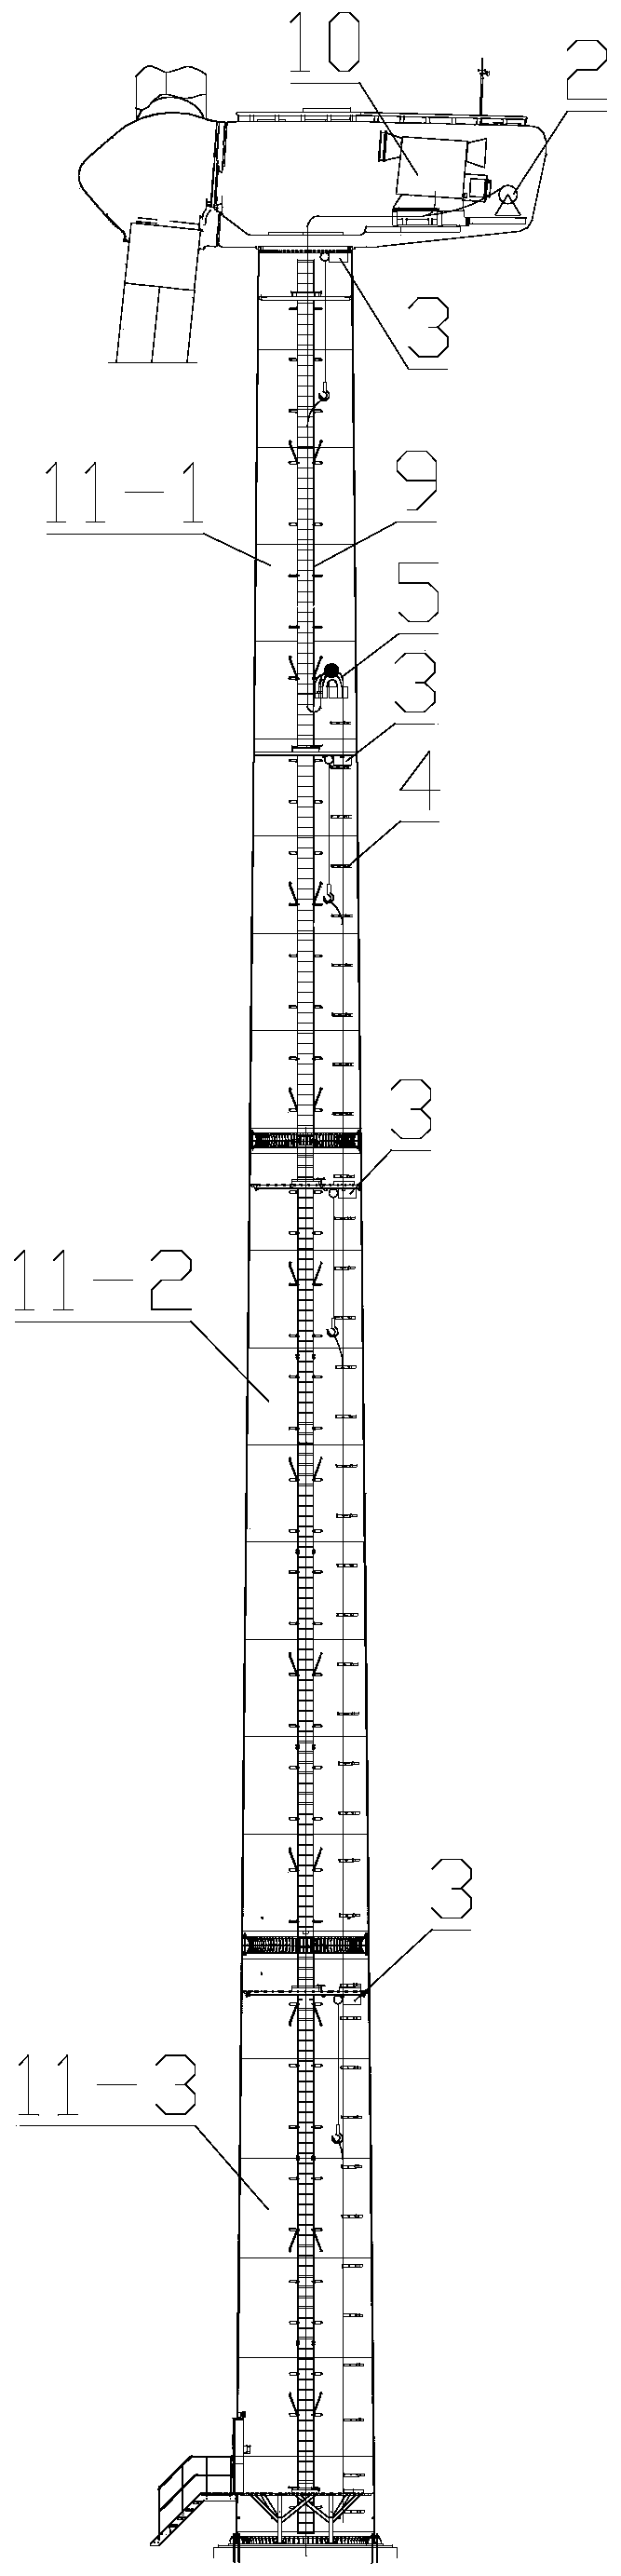 Large-scale cable laying method for wind turbines